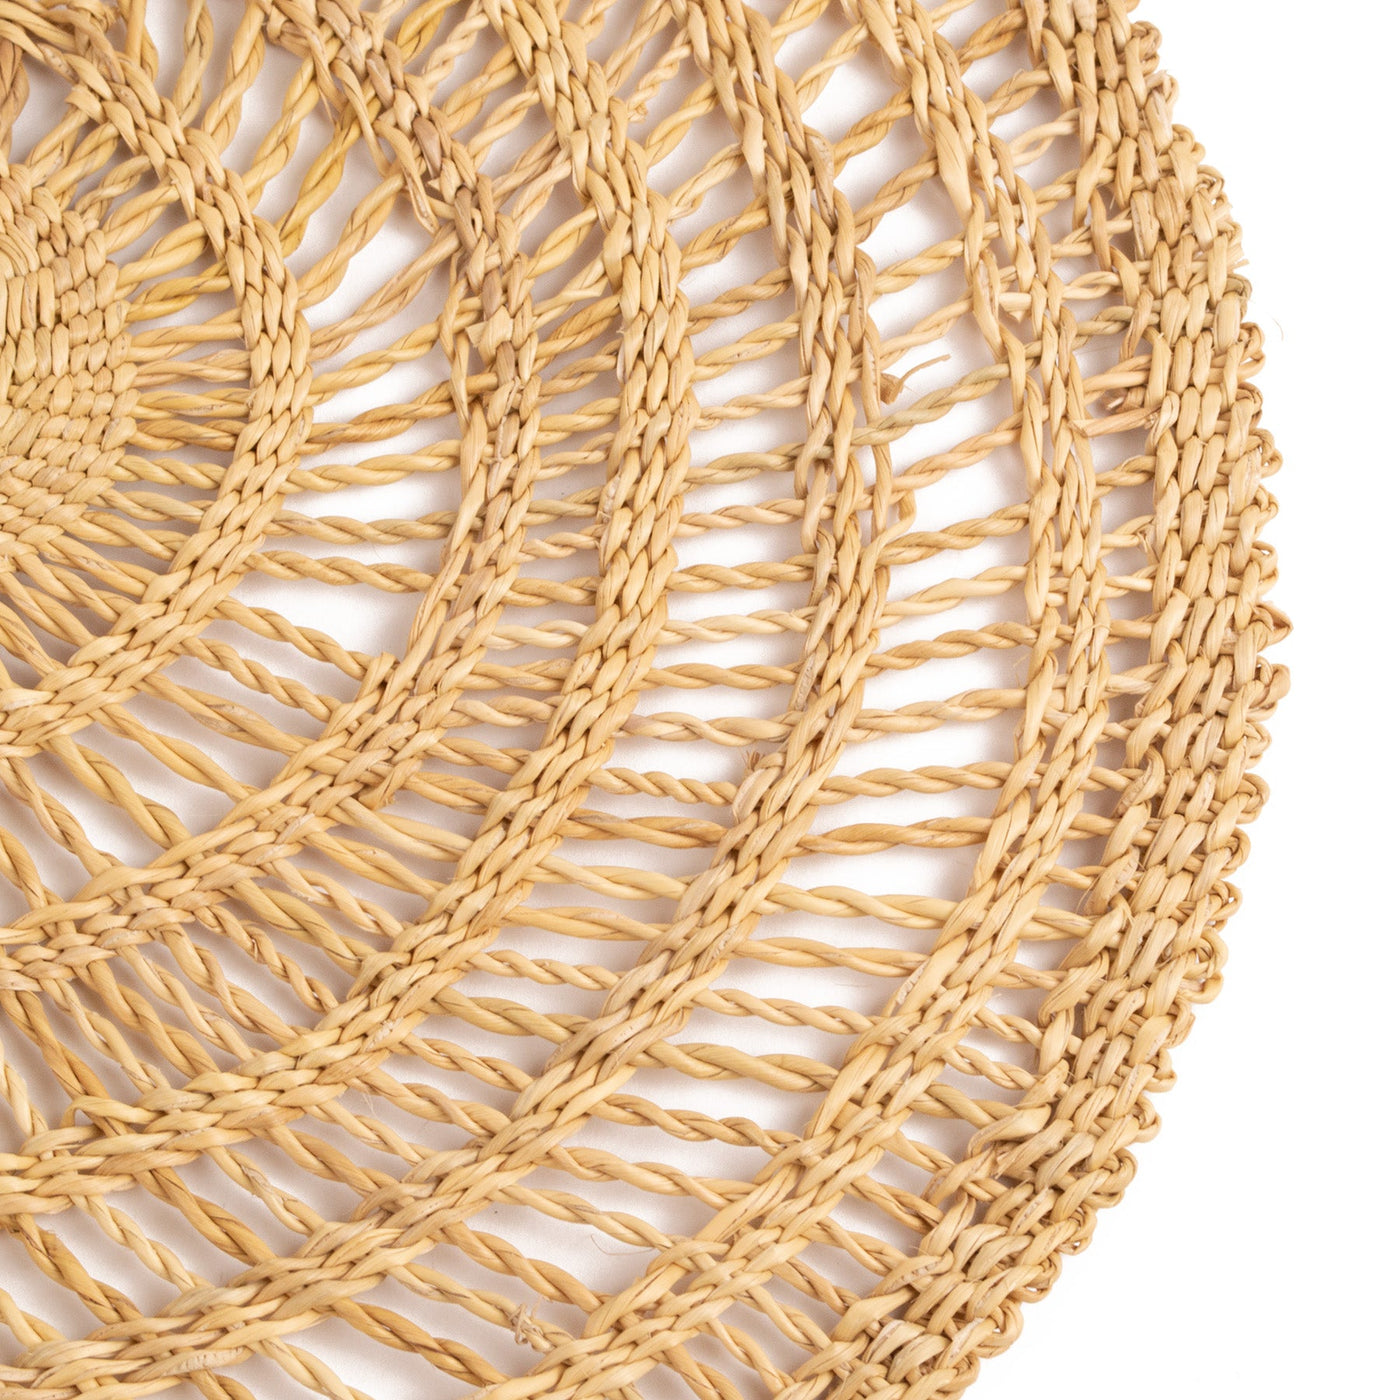 Neutral Placemats - 15" Laced Round, Set of 2